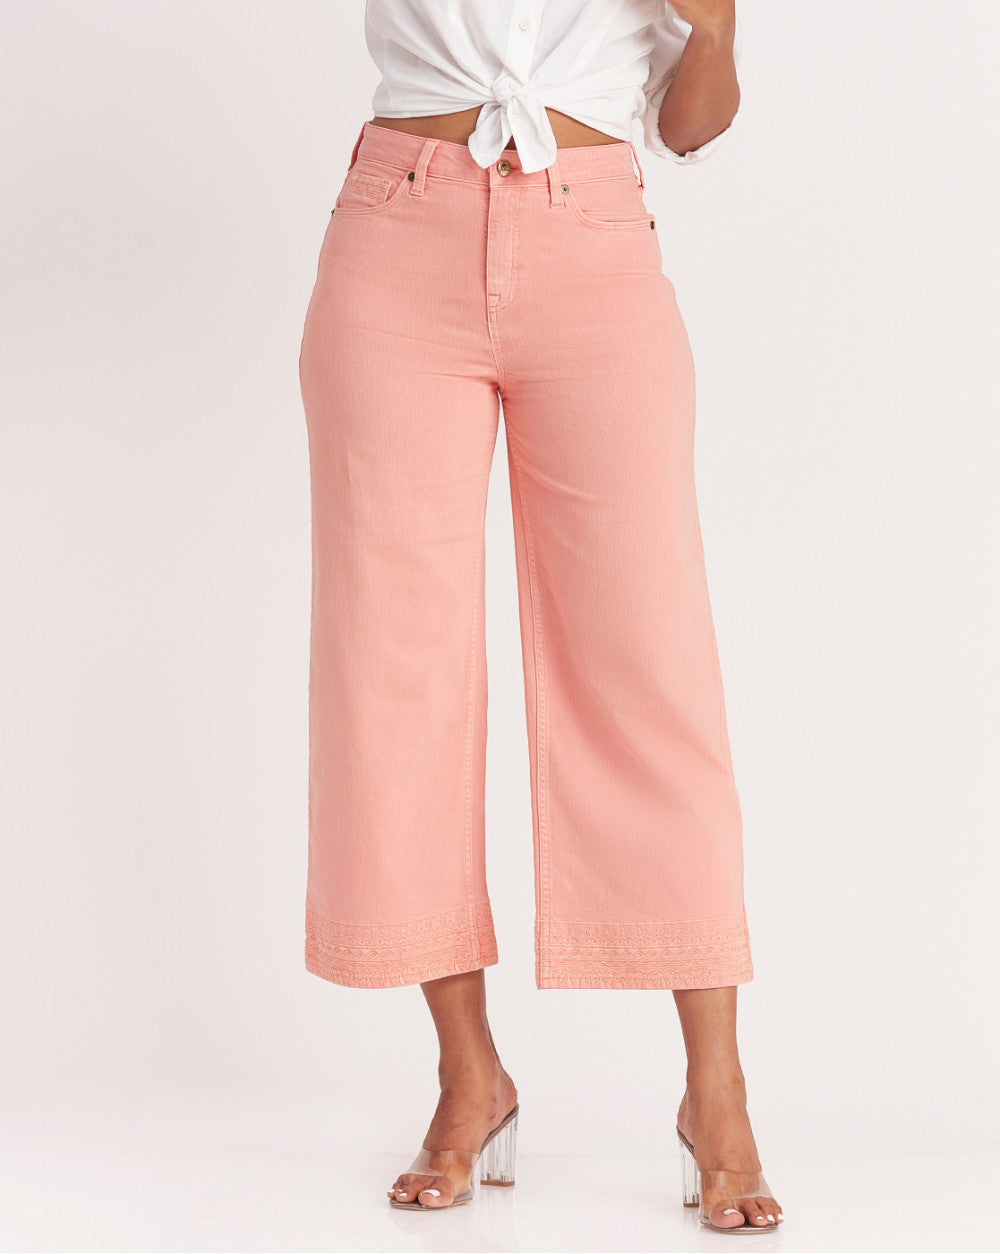 Wide Leg High Waist Boho Embroidered Colored Jeans - Coral